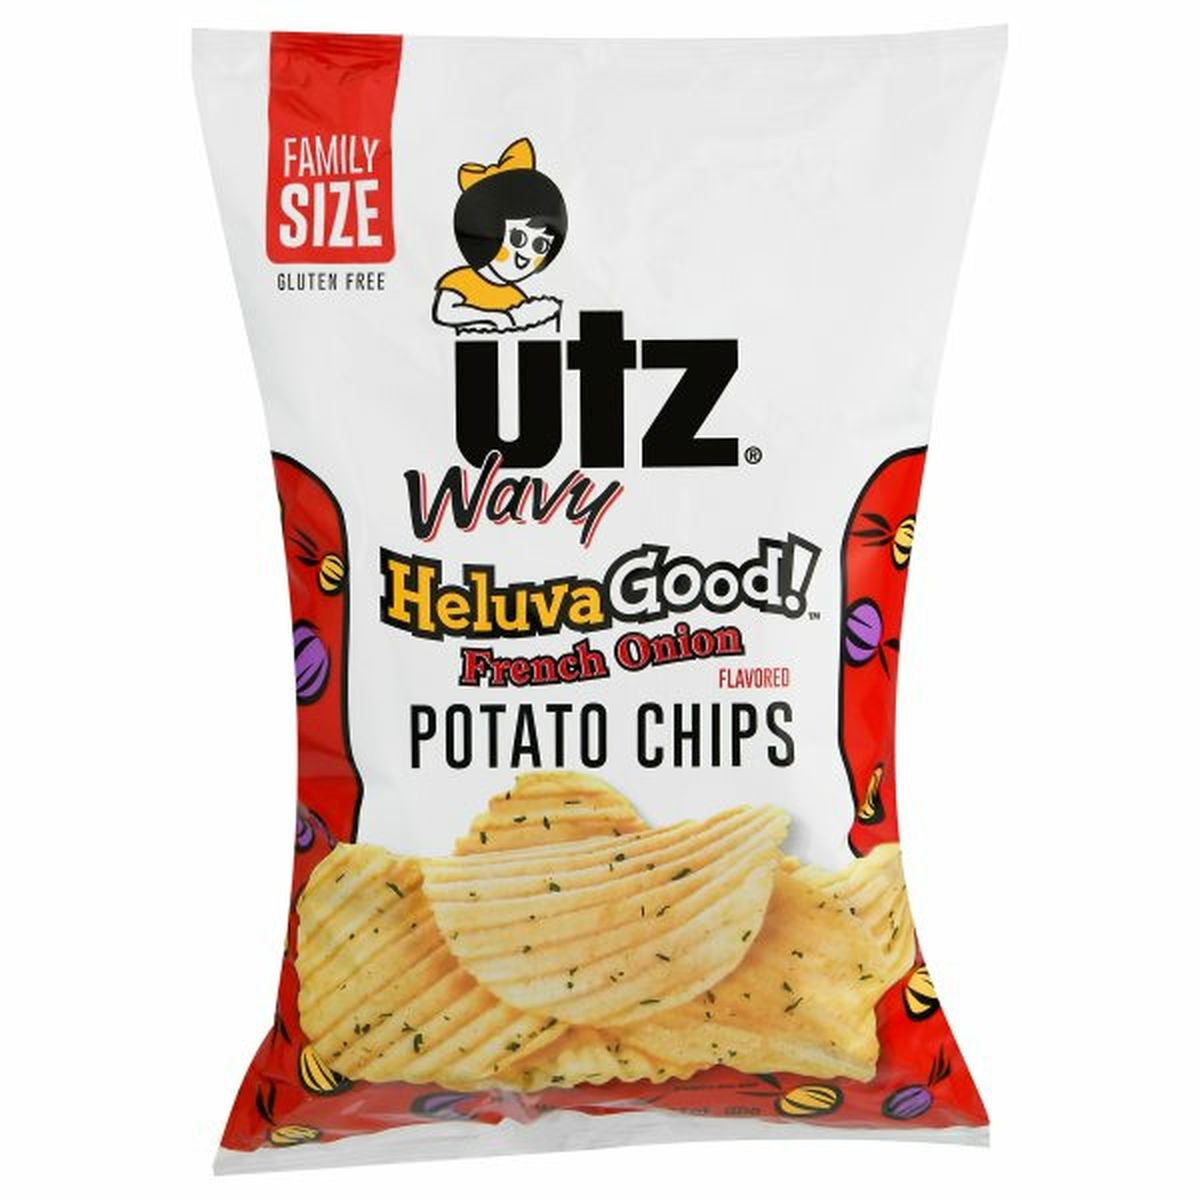 Calories in Utz Wavy Heluva Good Potato Chips, French Onion Flavored, Family Size